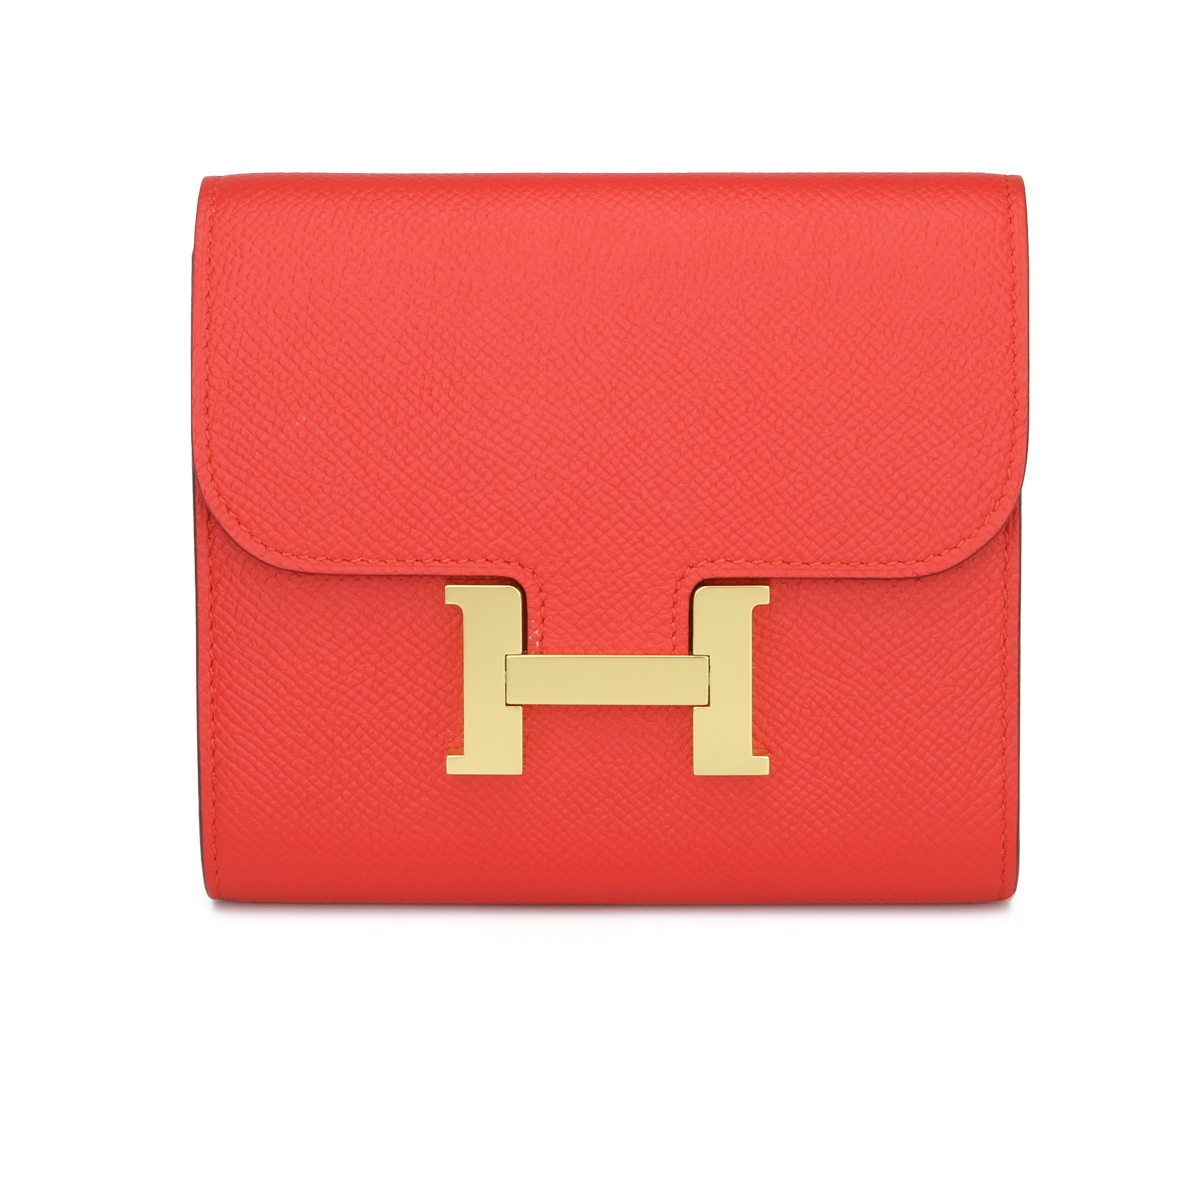 Hermes, Bags, Brand New Herms Constance Long Wallet